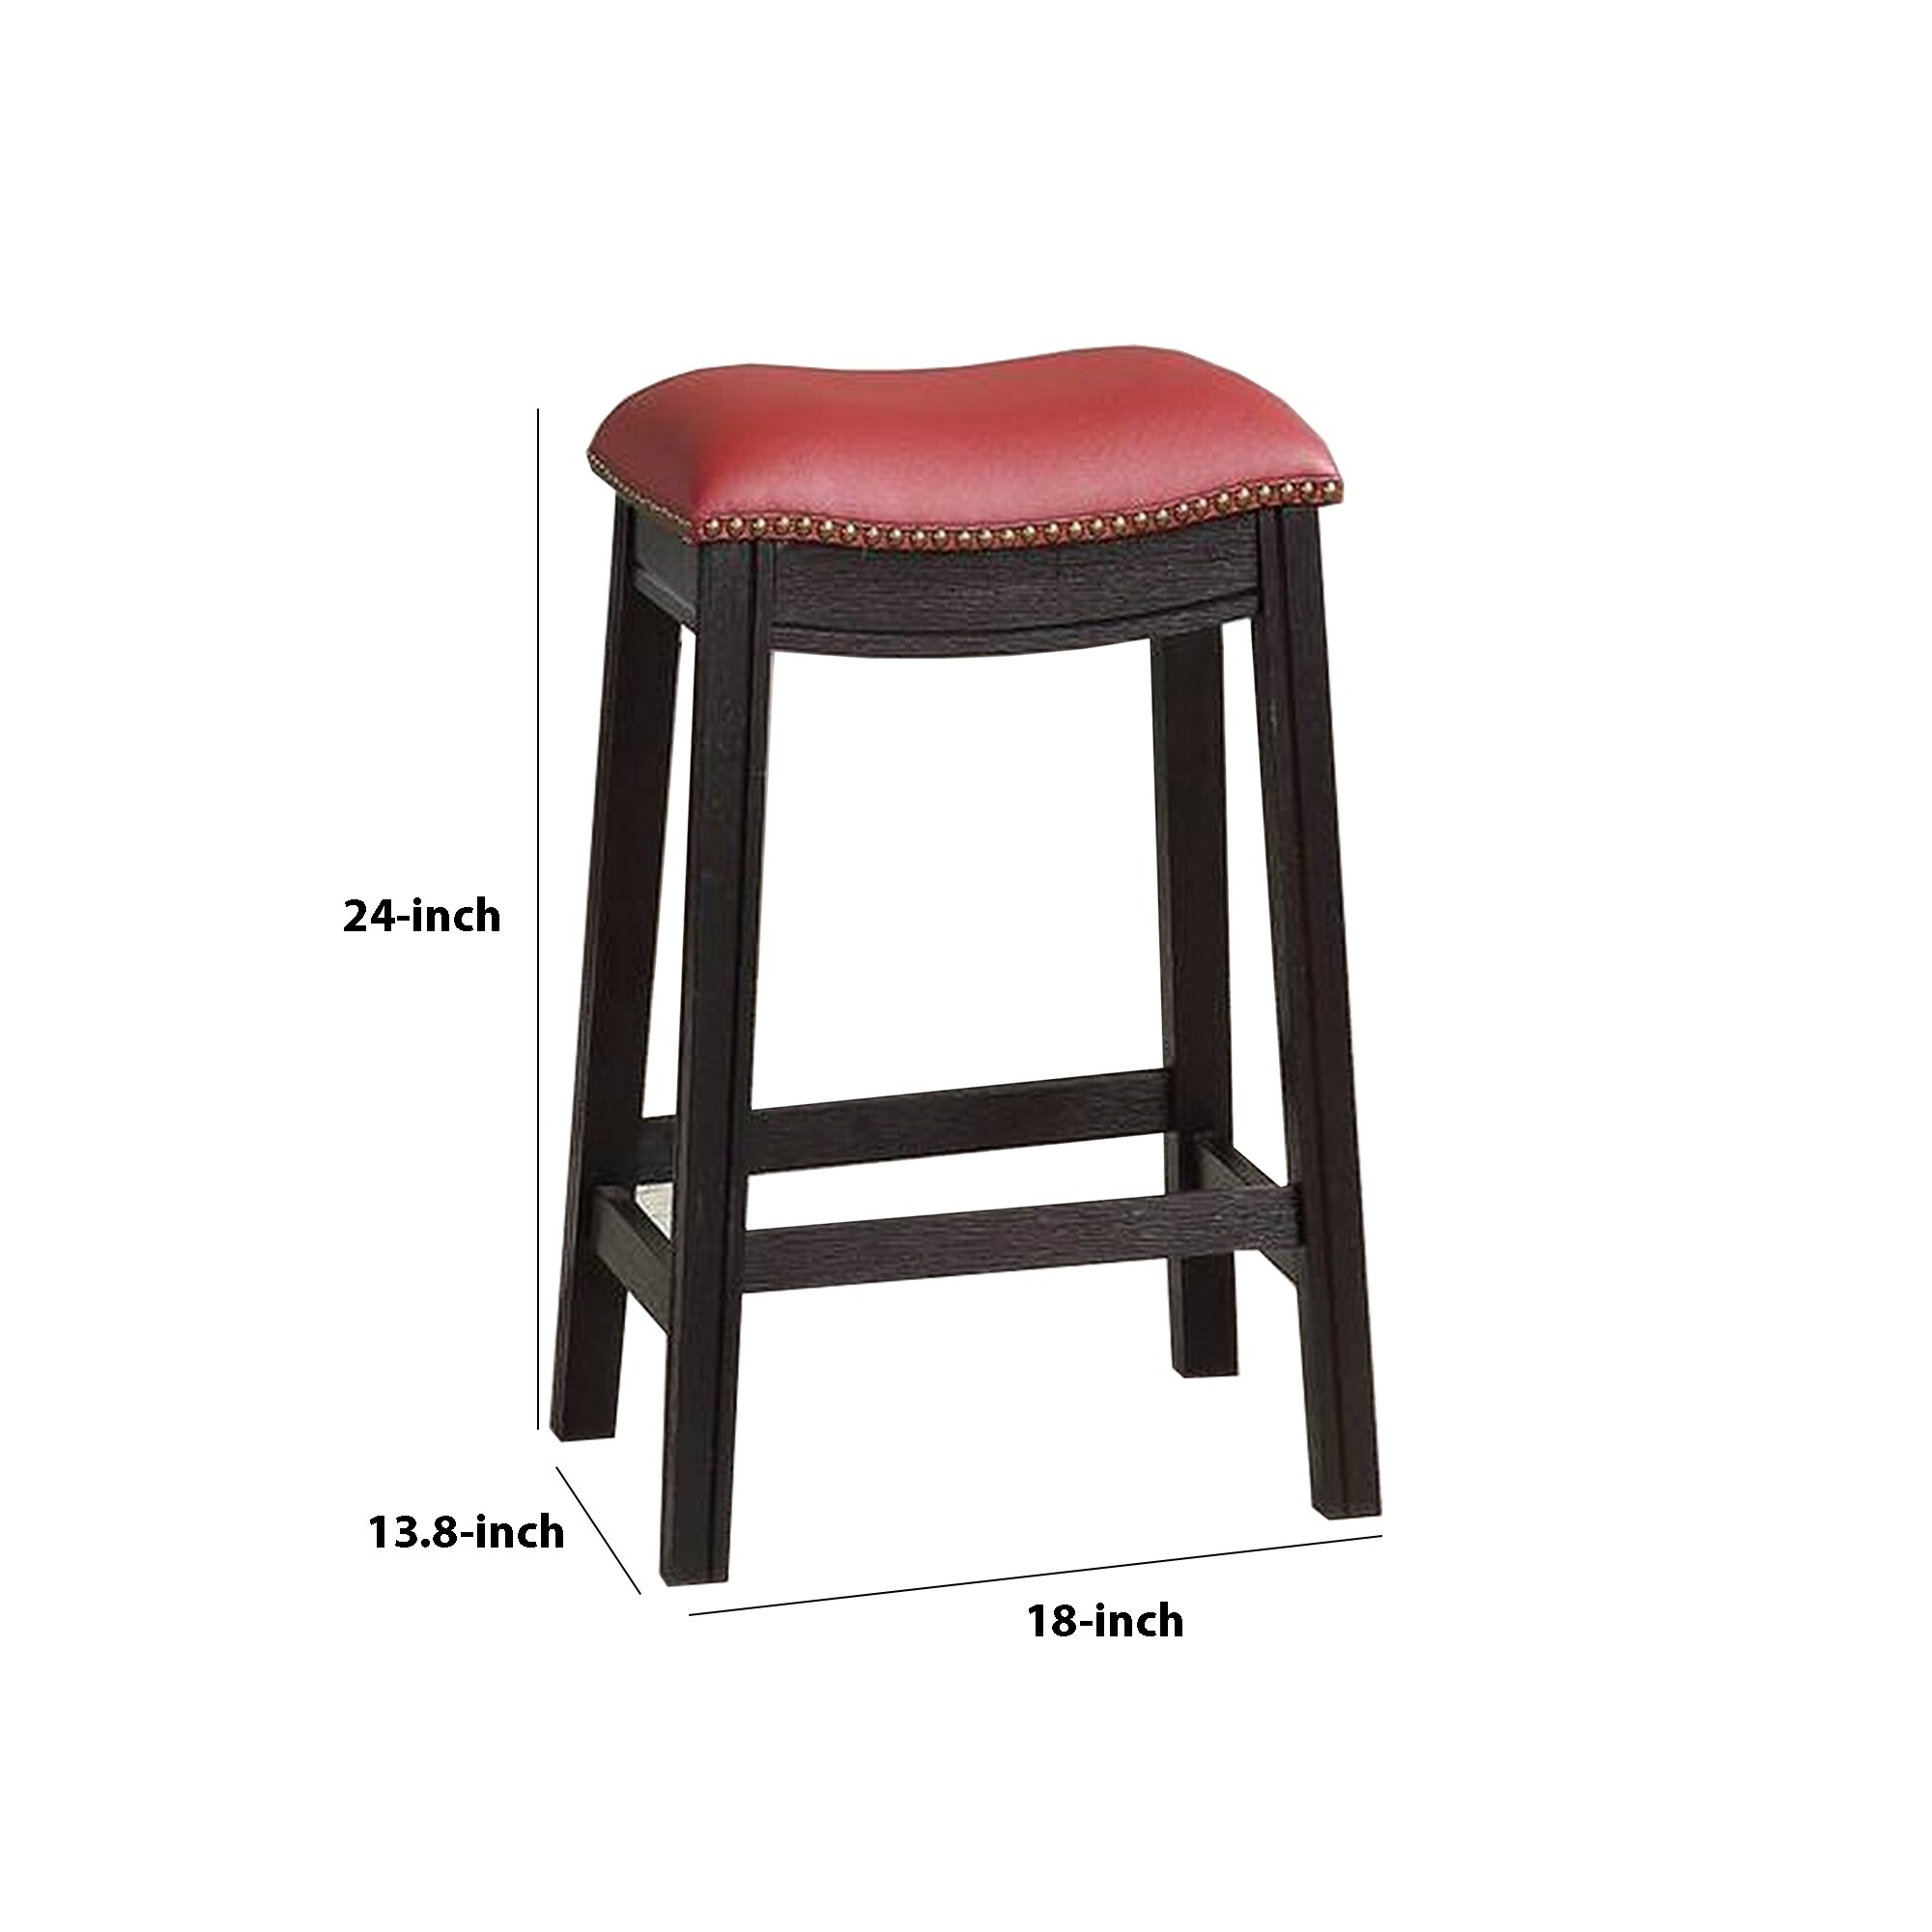 24 Inch Padded Counter Stool with Nailhead Trim, Set of 2, Brown and Red